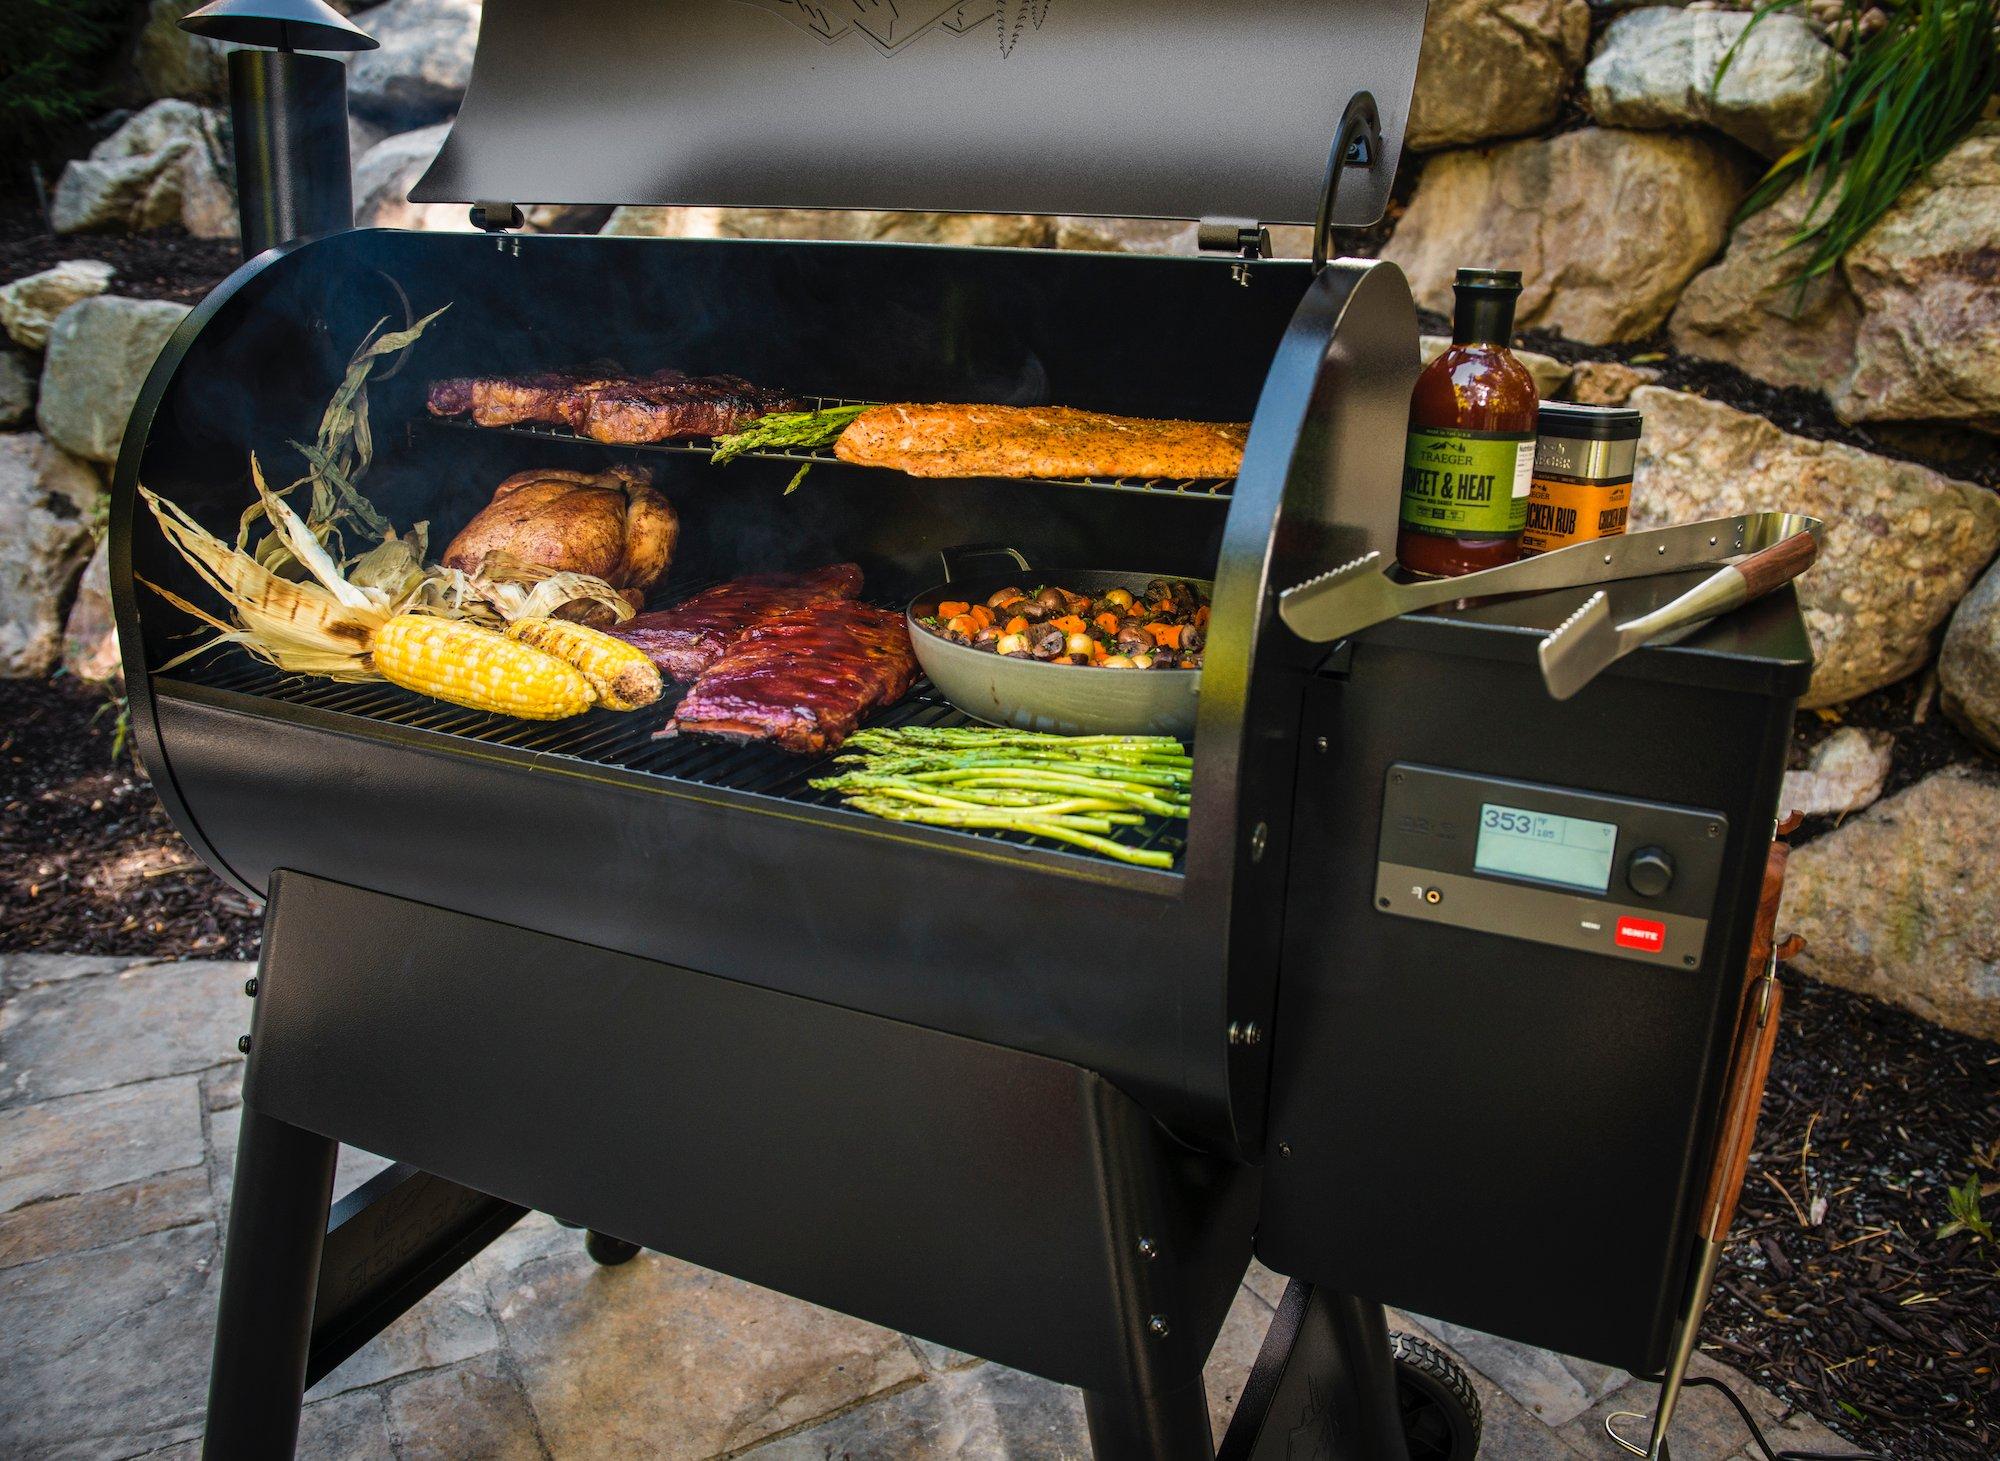 Traeger Pro 780 Black Wood Pellet Grill Lifestyle Grilling Foods and some Seasonings on the Side